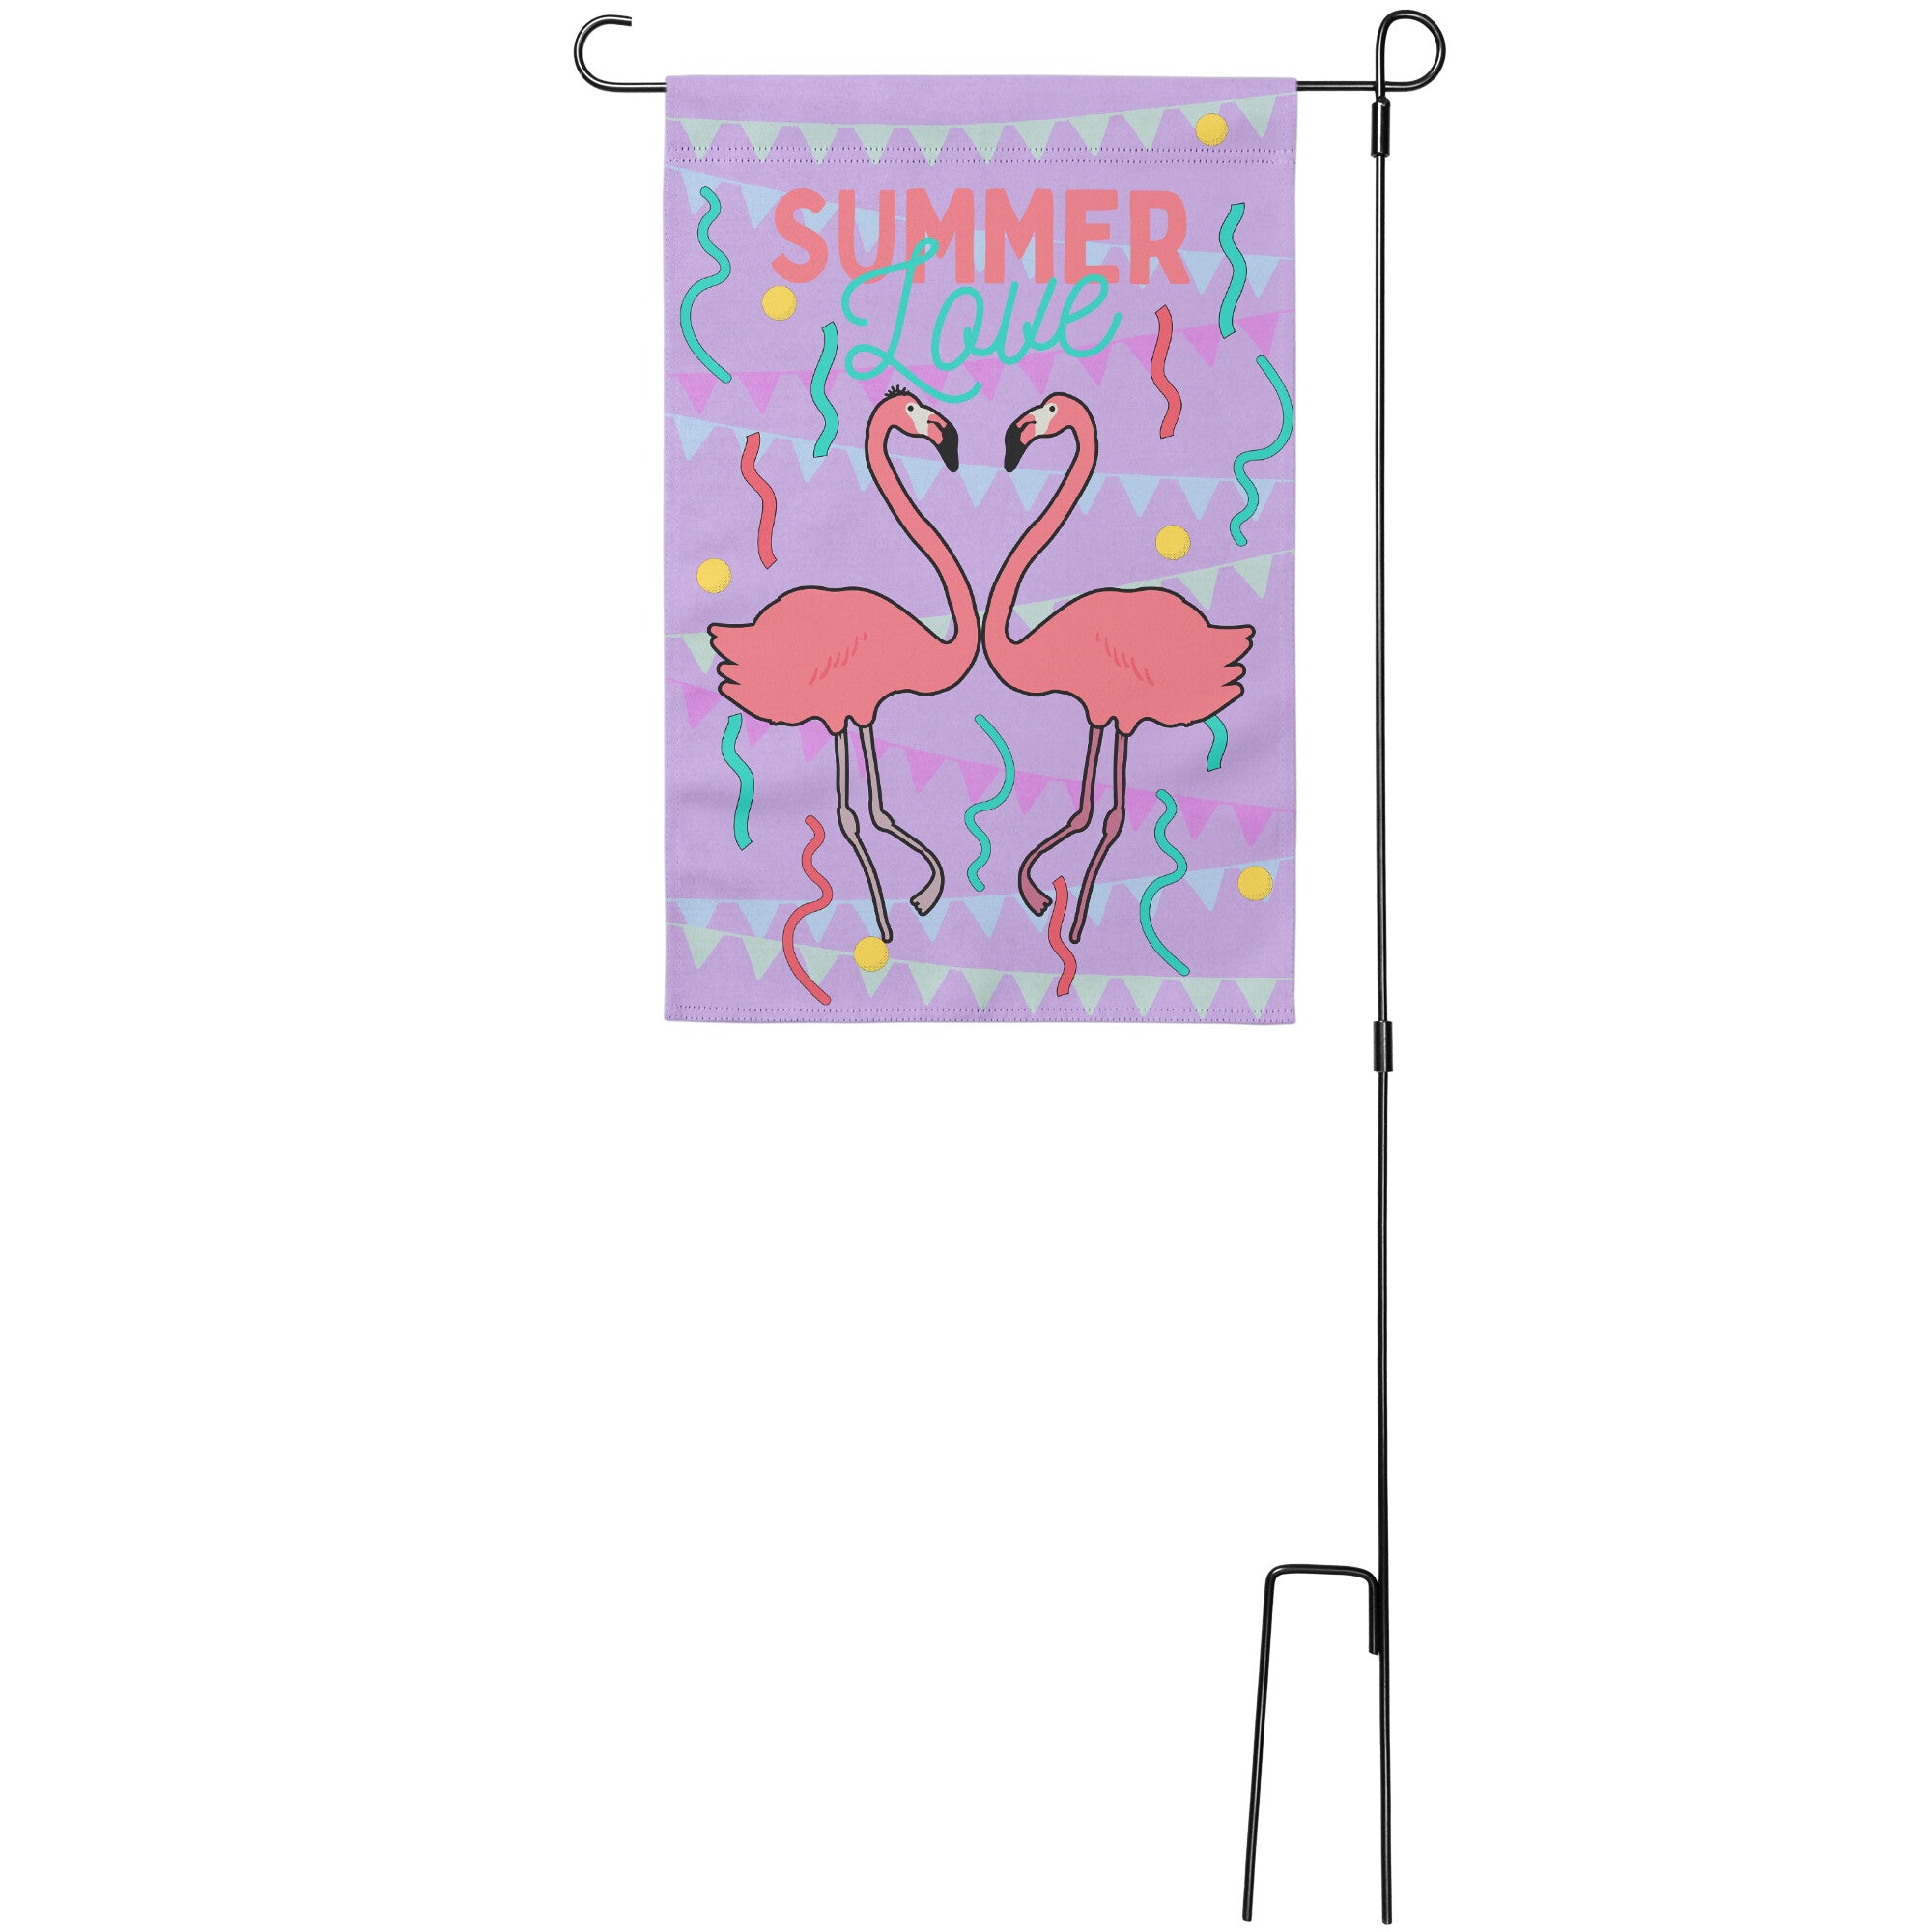 Summer Love Flamingos Yard Banner on pole stand